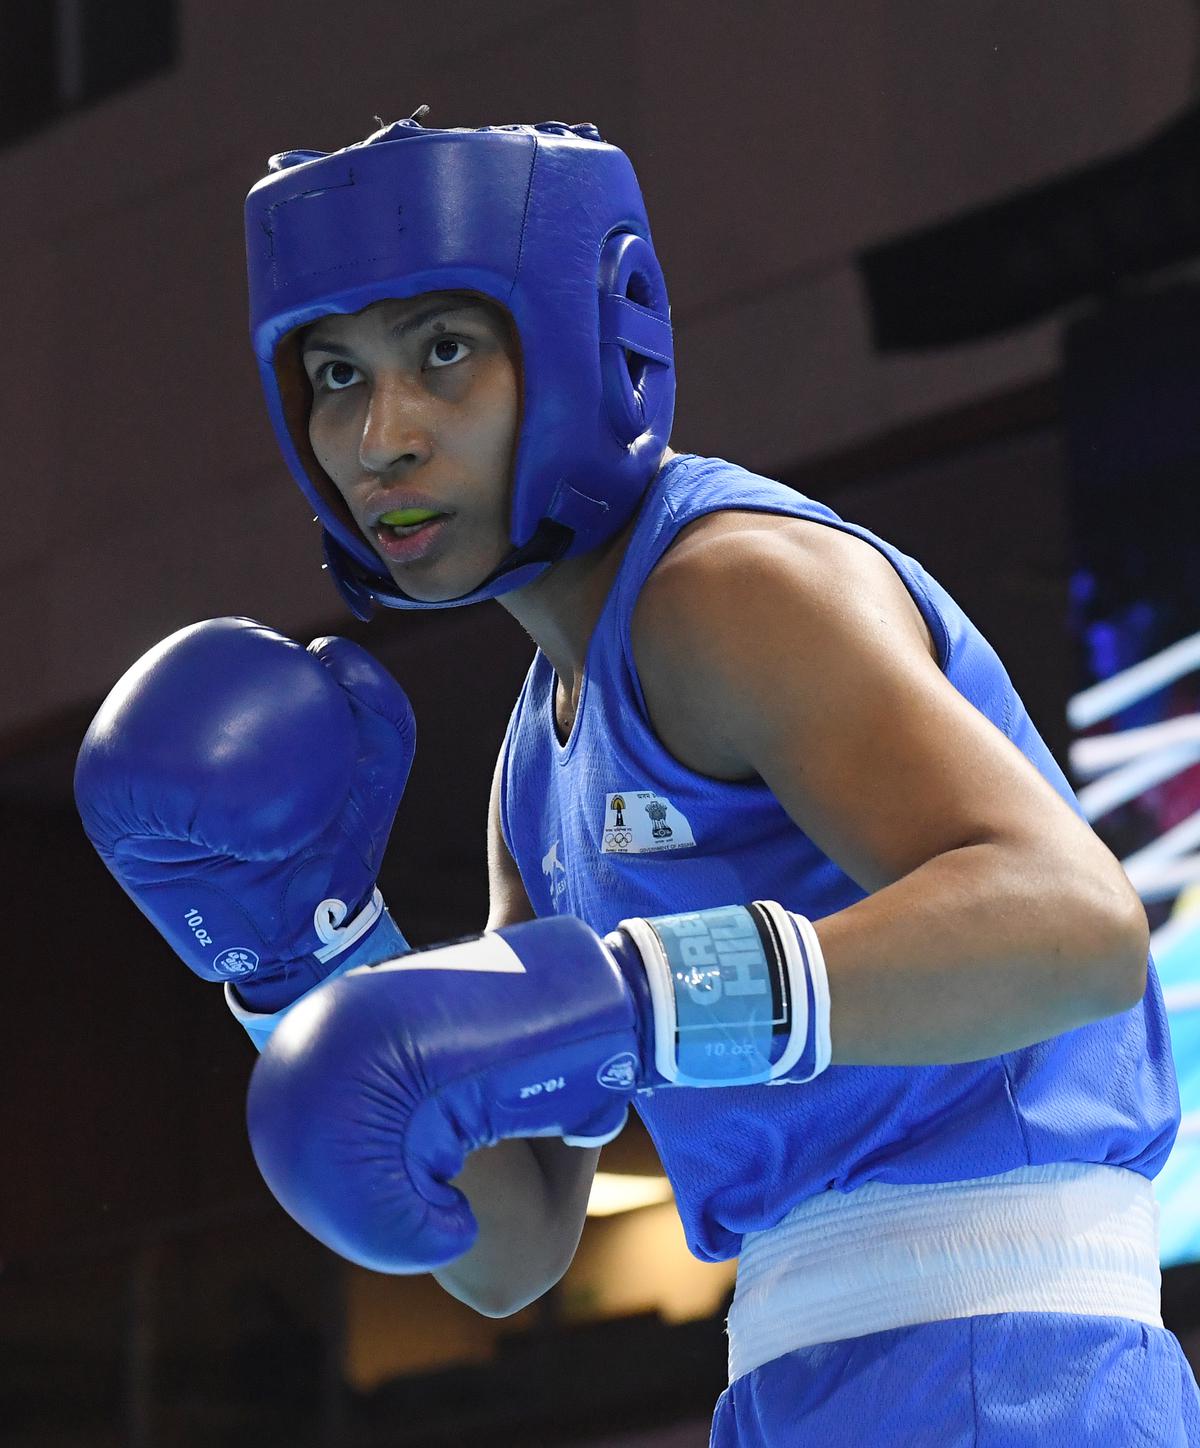 Lovlina Borgohain of Assam, who won against Indraja K.A. of Kerala, during the quarterfinals of the women’s 75 kg middle weight category in the boxing arena of the 36th National Games at Gandhinagar on October 9, 2022.